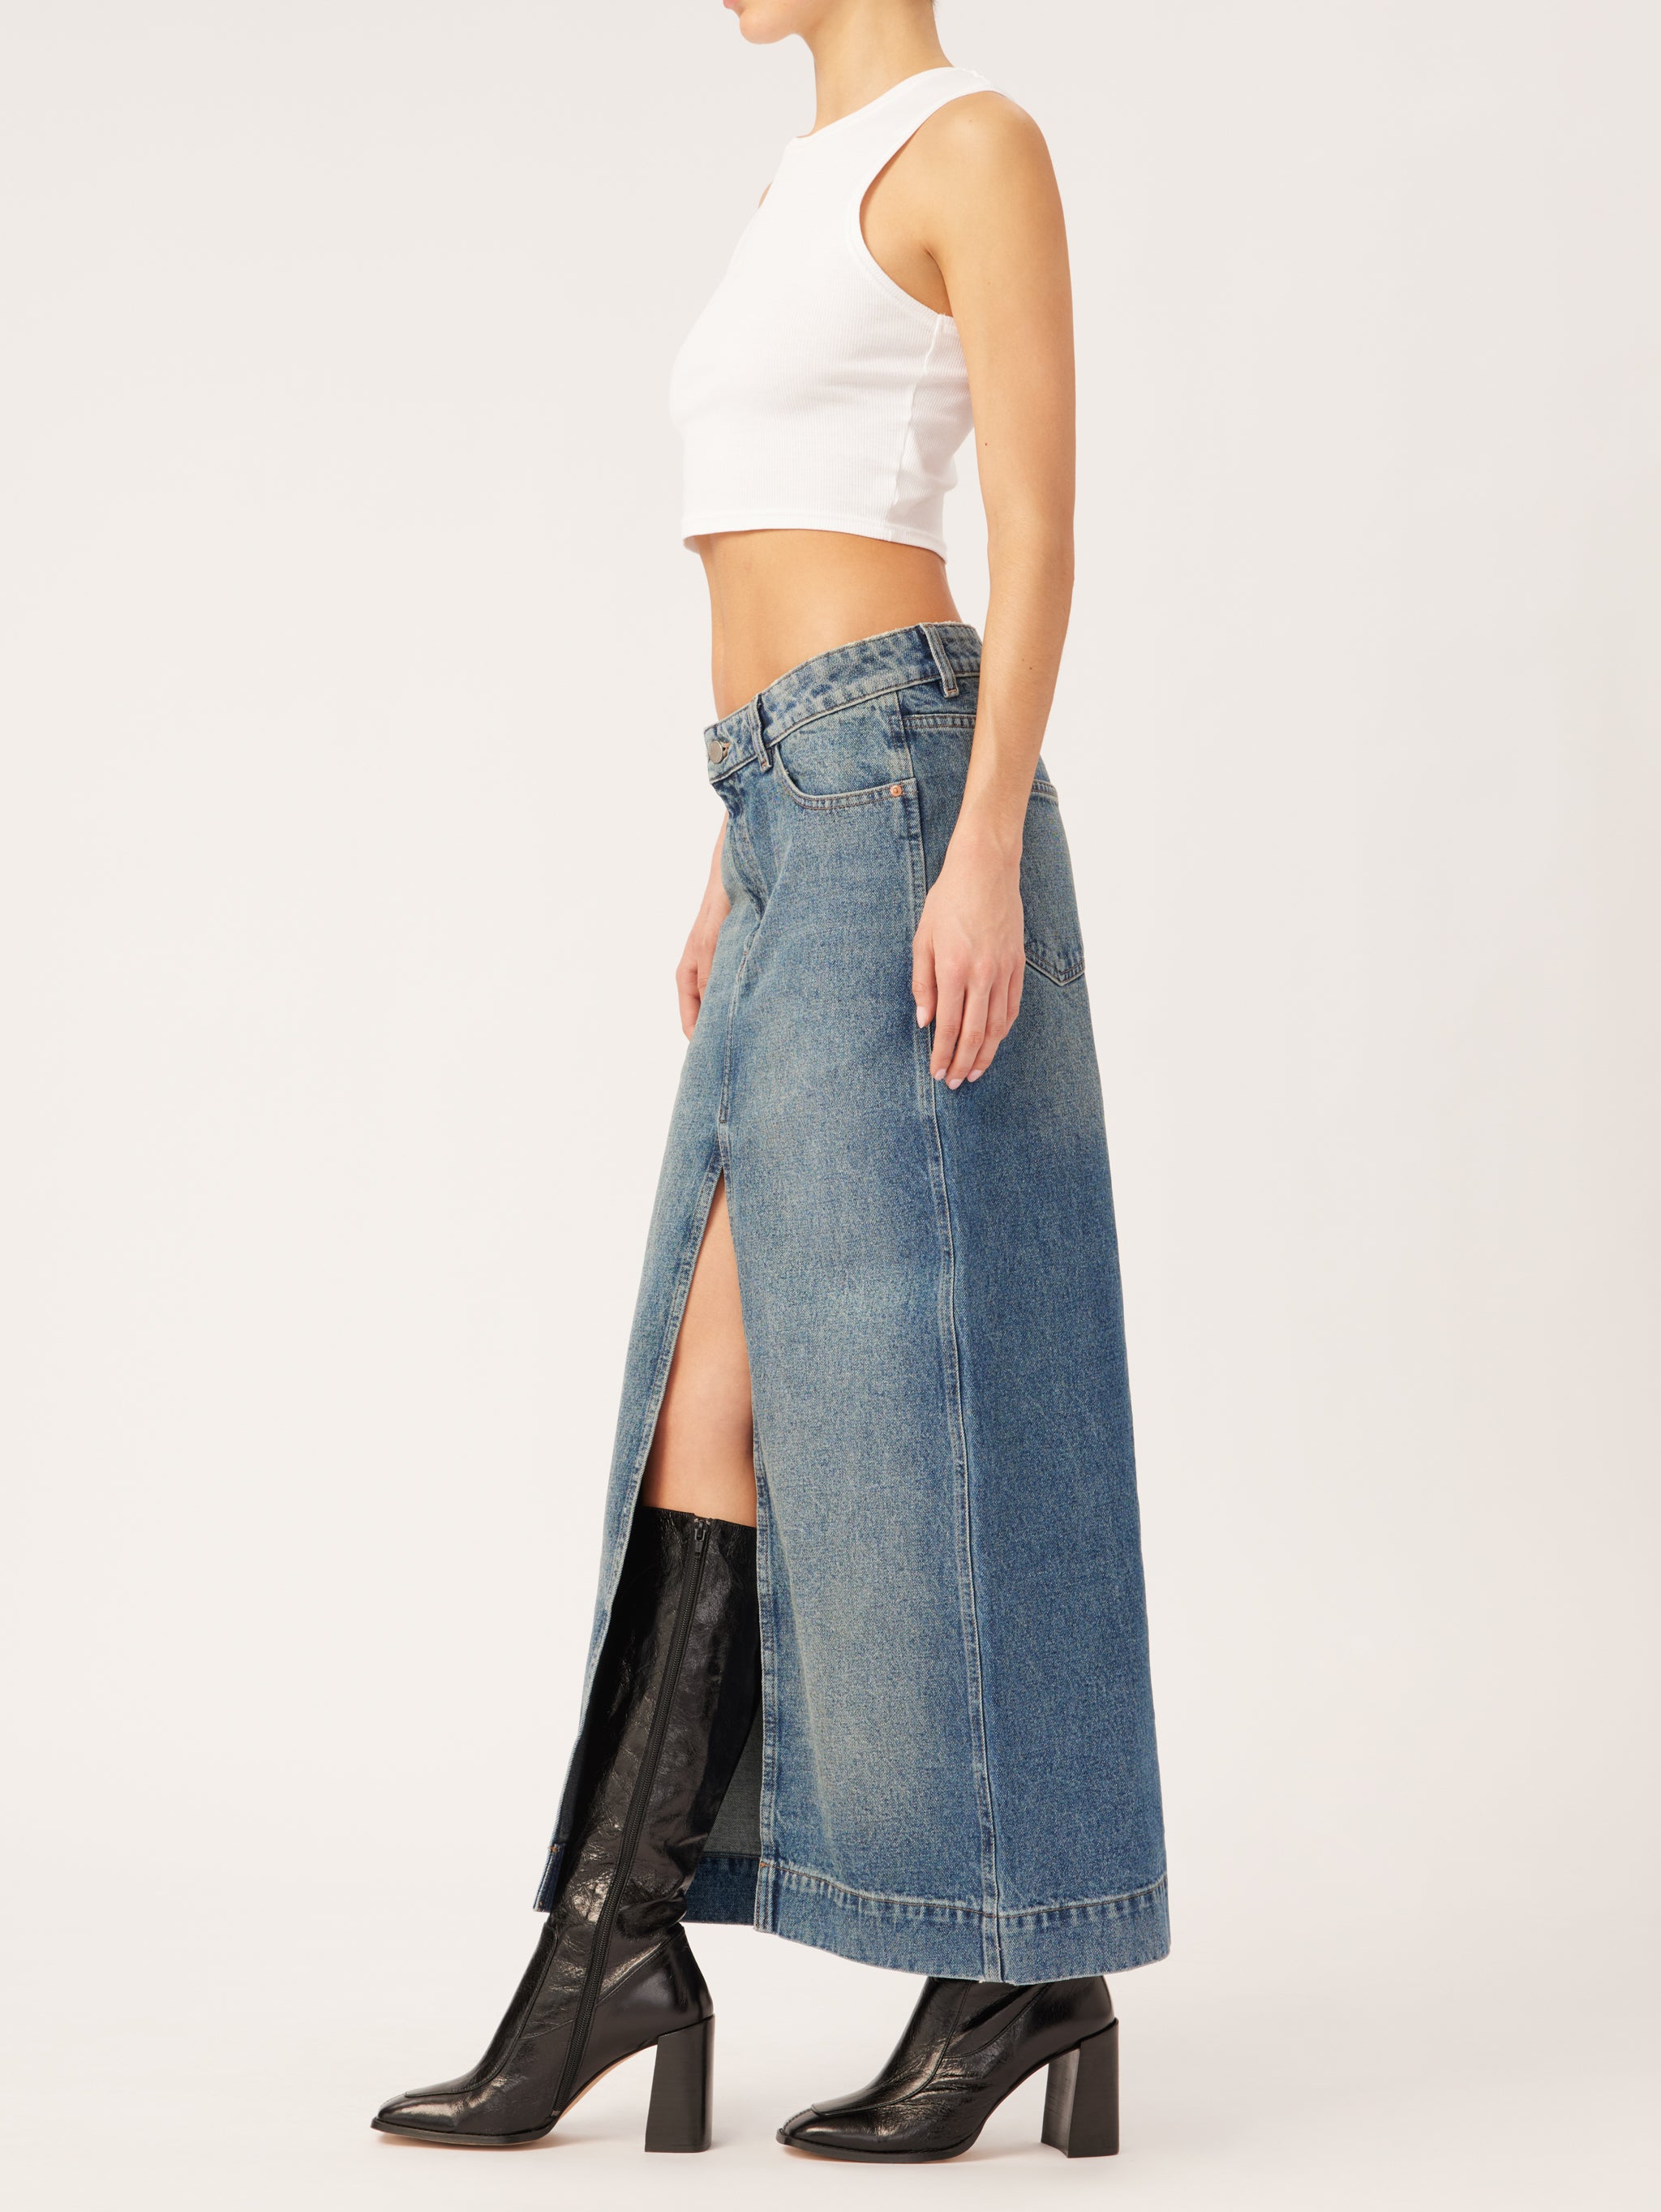 Asra is a maxi skirt with a form flattering fit that sits at your natural waist.  Aged Mid is a vintage inspired mid-indigo wash with an authentic worn-in look. It features antique silver hardware, light khaki stitching, clean hem and an ecru back patch.